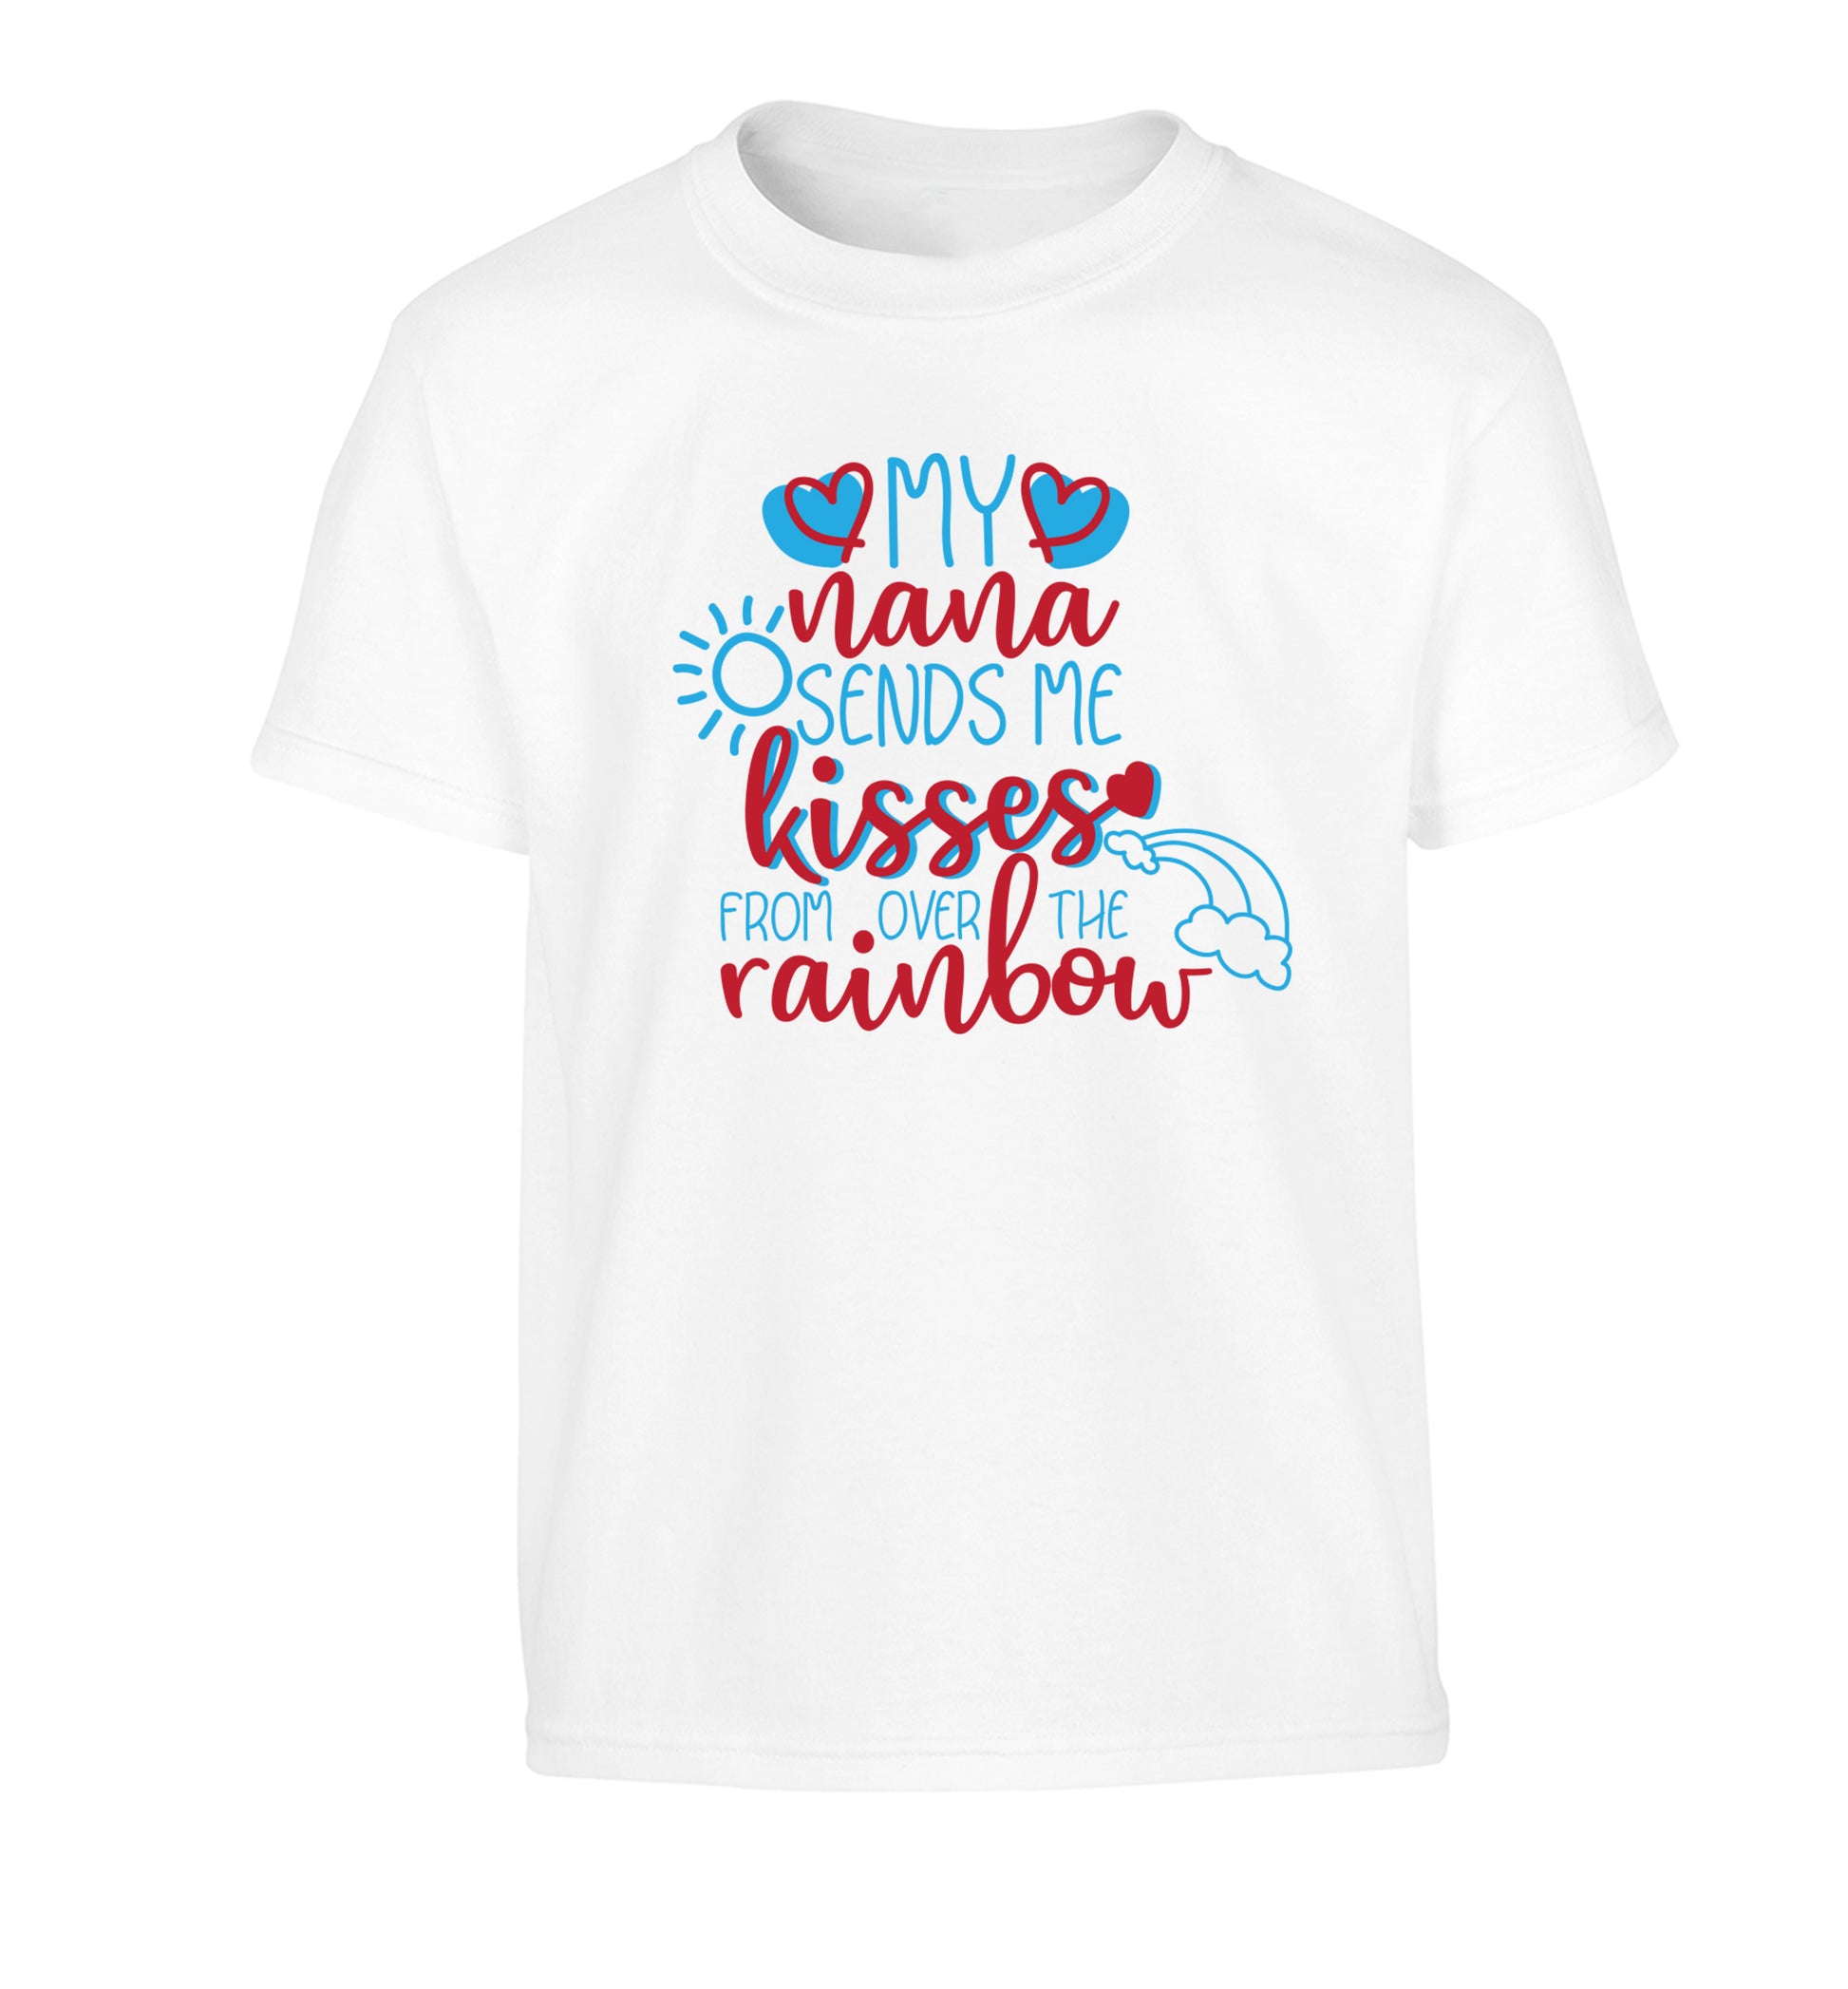 My nana sends me kisses from over the rainbow Children's white Tshirt 12-13 Years